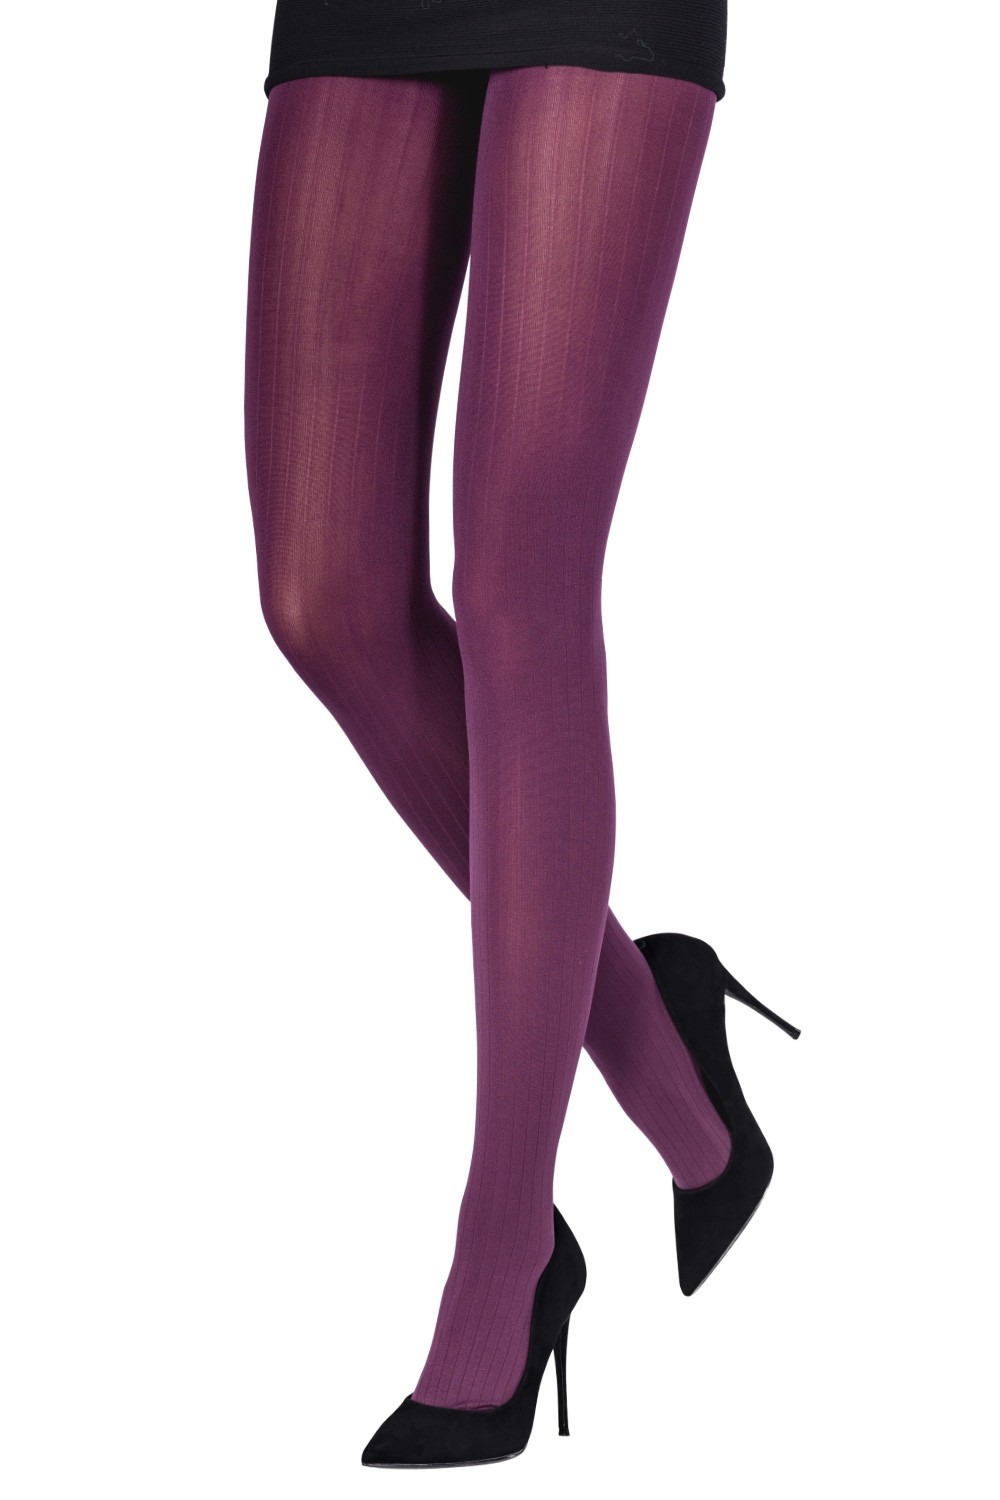 Amscan 397287.14 Party Perfect Team Spirit Footless Adult Tights Accessory,  Purple, One Size